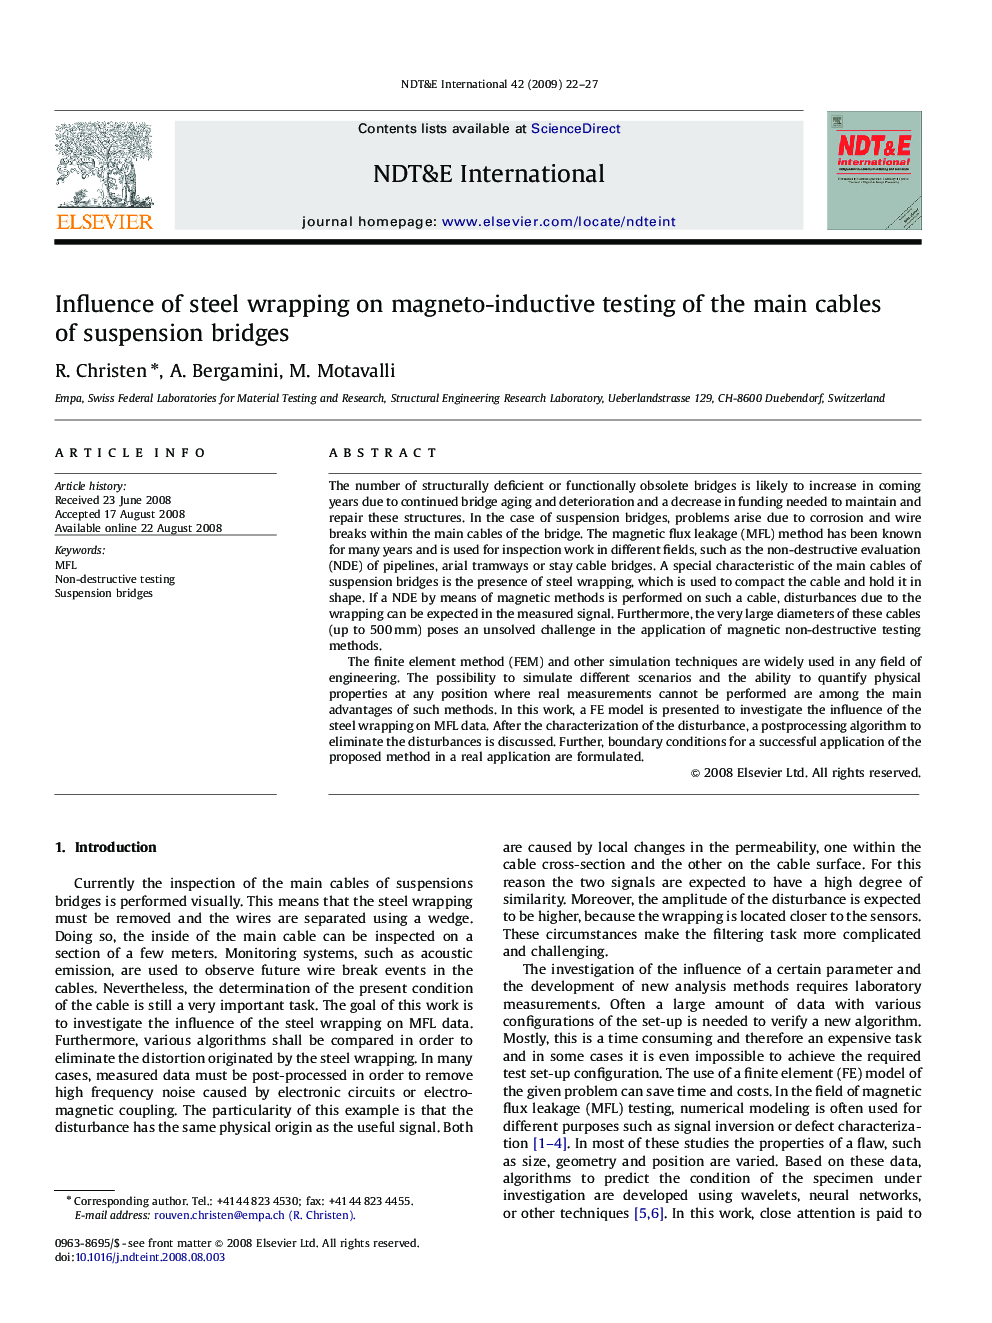 Influence of steel wrapping on magneto-inductive testing of the main cables of suspension bridges